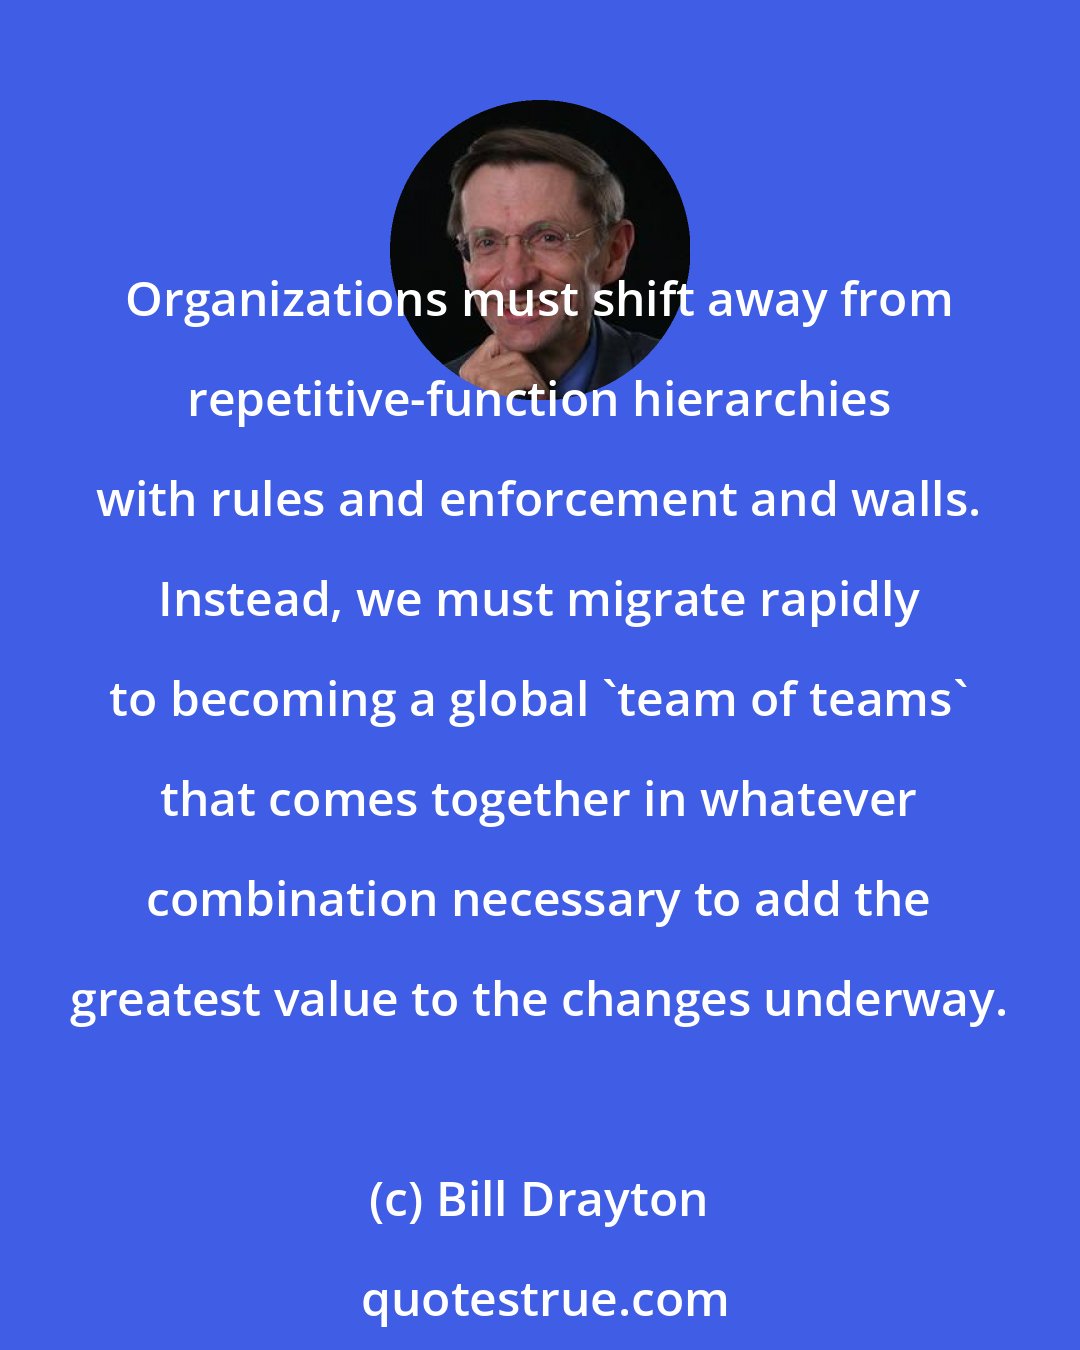 Bill Drayton: Organizations must shift away from repetitive-function hierarchies with rules and enforcement and walls. Instead, we must migrate rapidly to becoming a global 'team of teams' that comes together in whatever combination necessary to add the greatest value to the changes underway.